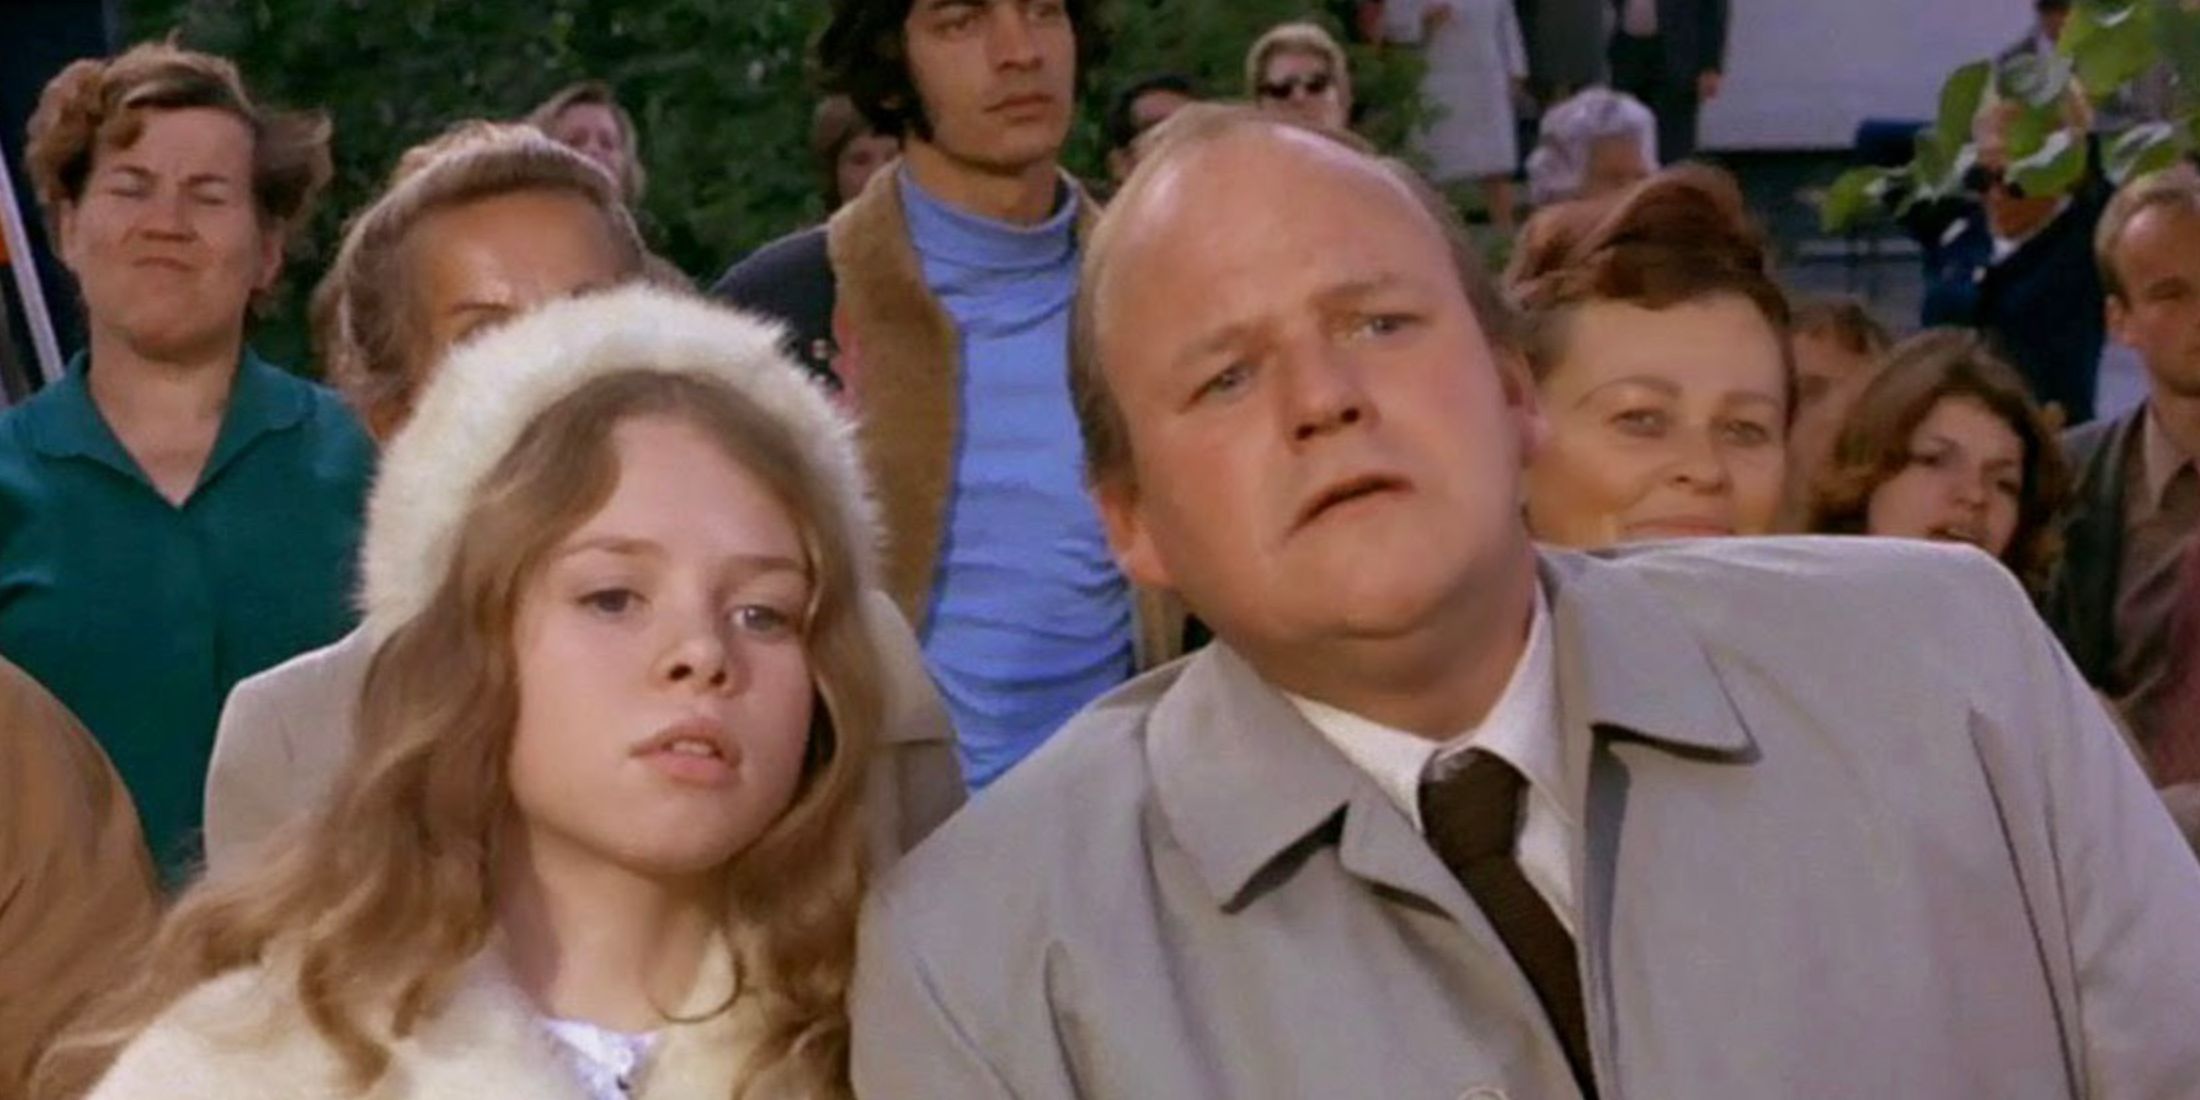 Veruca and her father in Willy Wonka and the Chocolate Factory